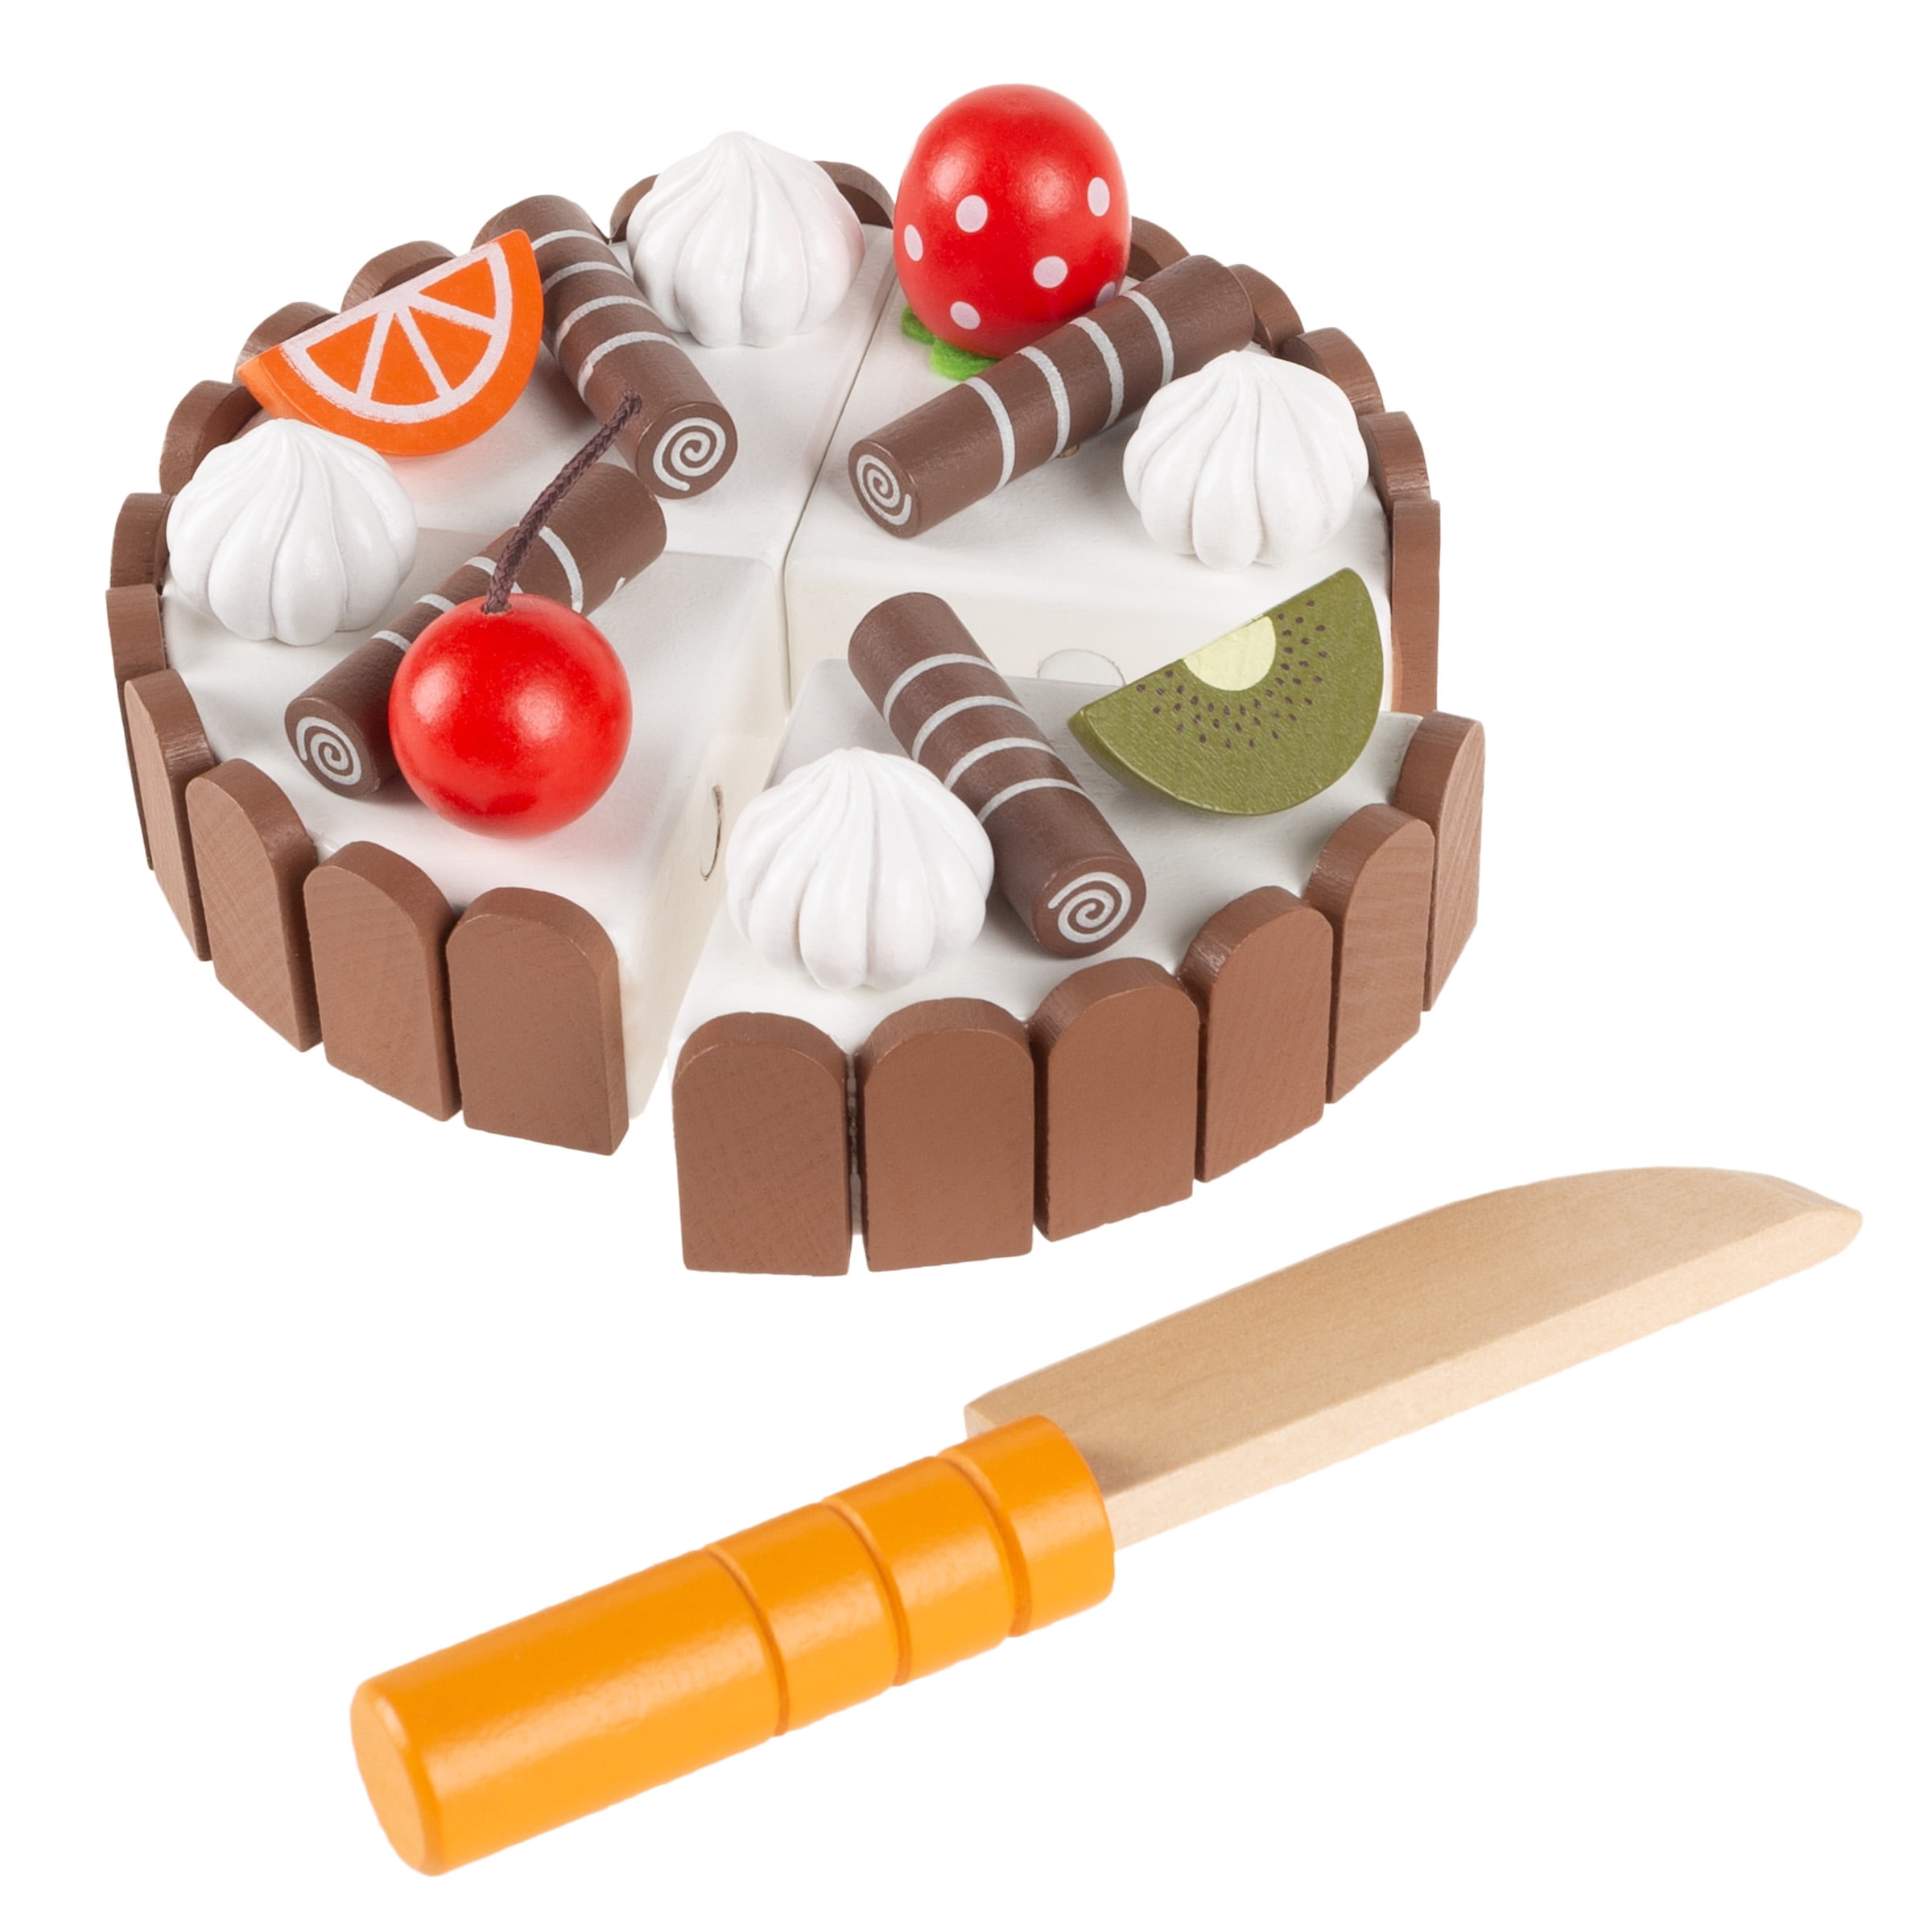 Birthday Cake-Kids Wooden Magnetic Toy Dessert Play Set by Hey! Play!